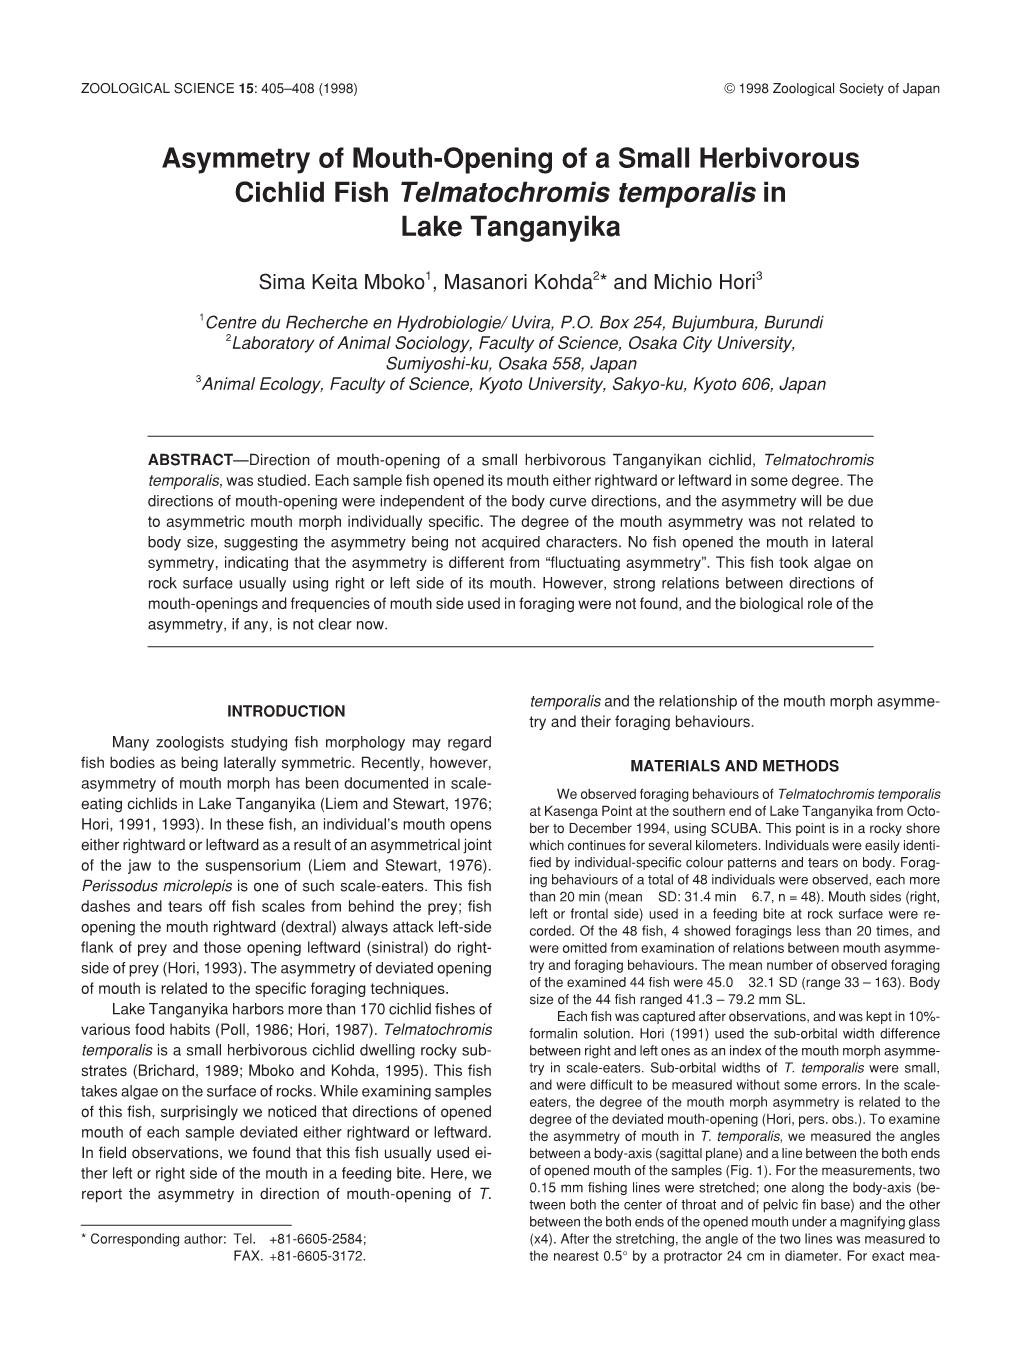 Asymmetry of Mouth-Opening of a Small Herbivorous Cichlid Fish Telmatochromis Temporalis in Lake Tanganyika